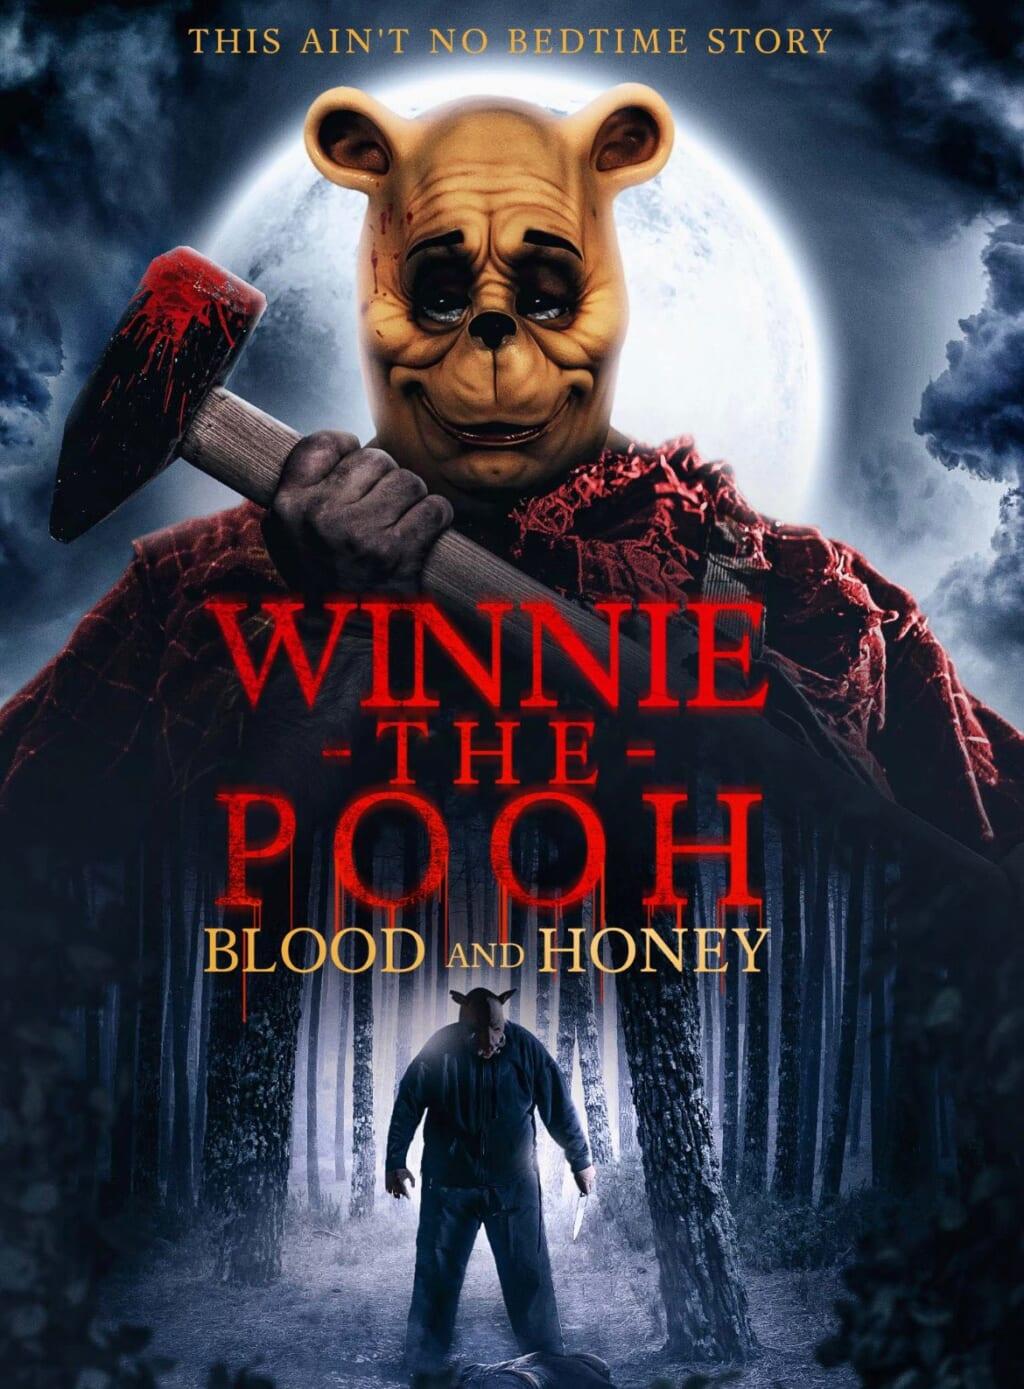 winnie-the-pooh-blood-and-honey-horror-movie-poster.jpg